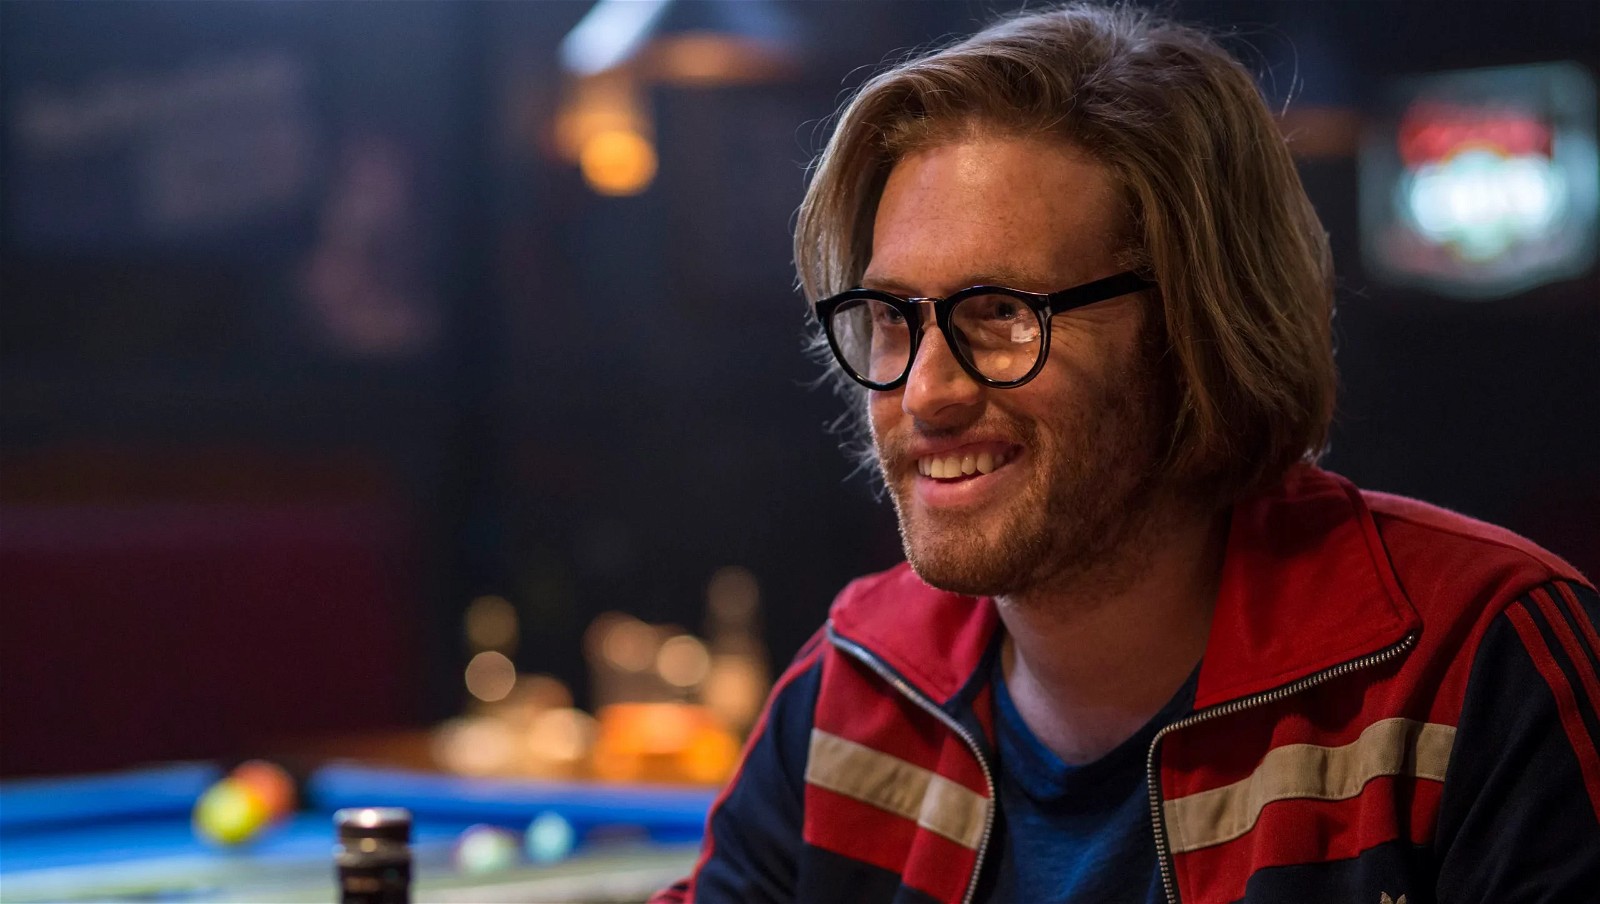 T.J. Miller refuses to resume his role in future Deadpool films